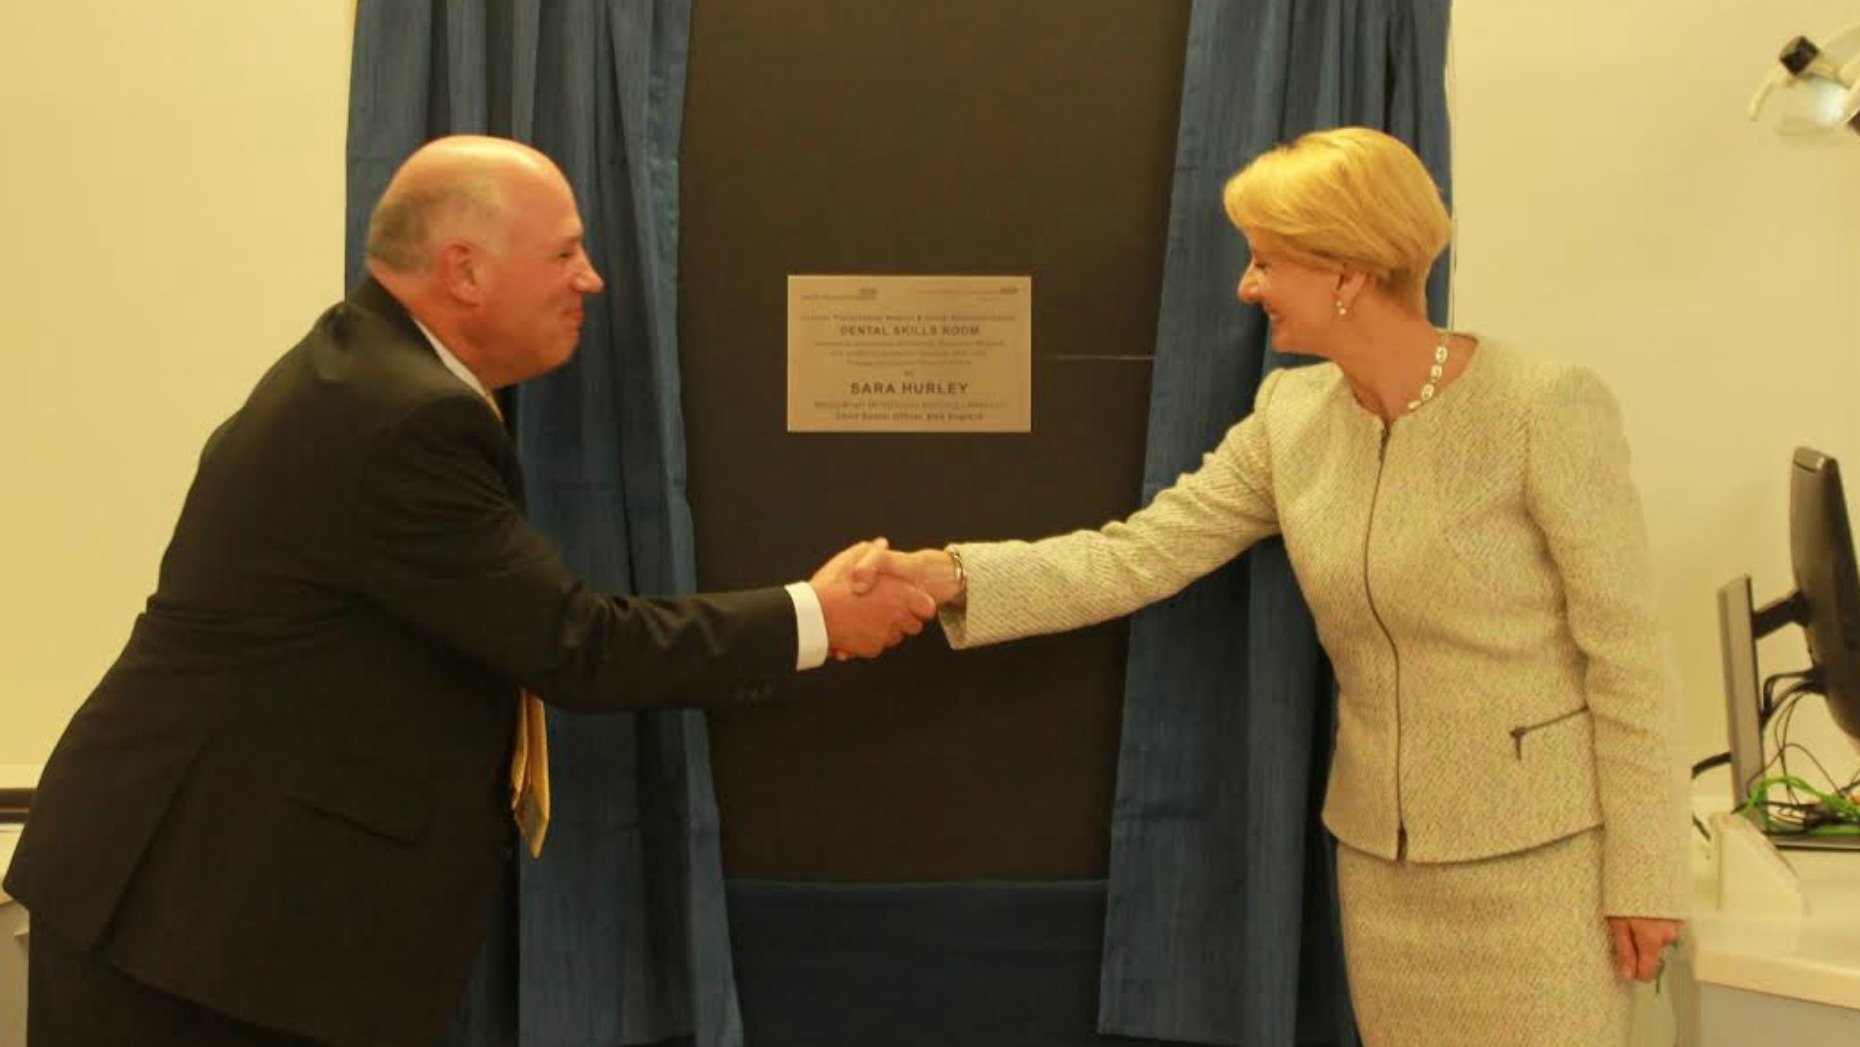 Sara Hurley unveiling the plaque with Stephen Dixon, Associate Post Graduate Dean for Health Education England. 